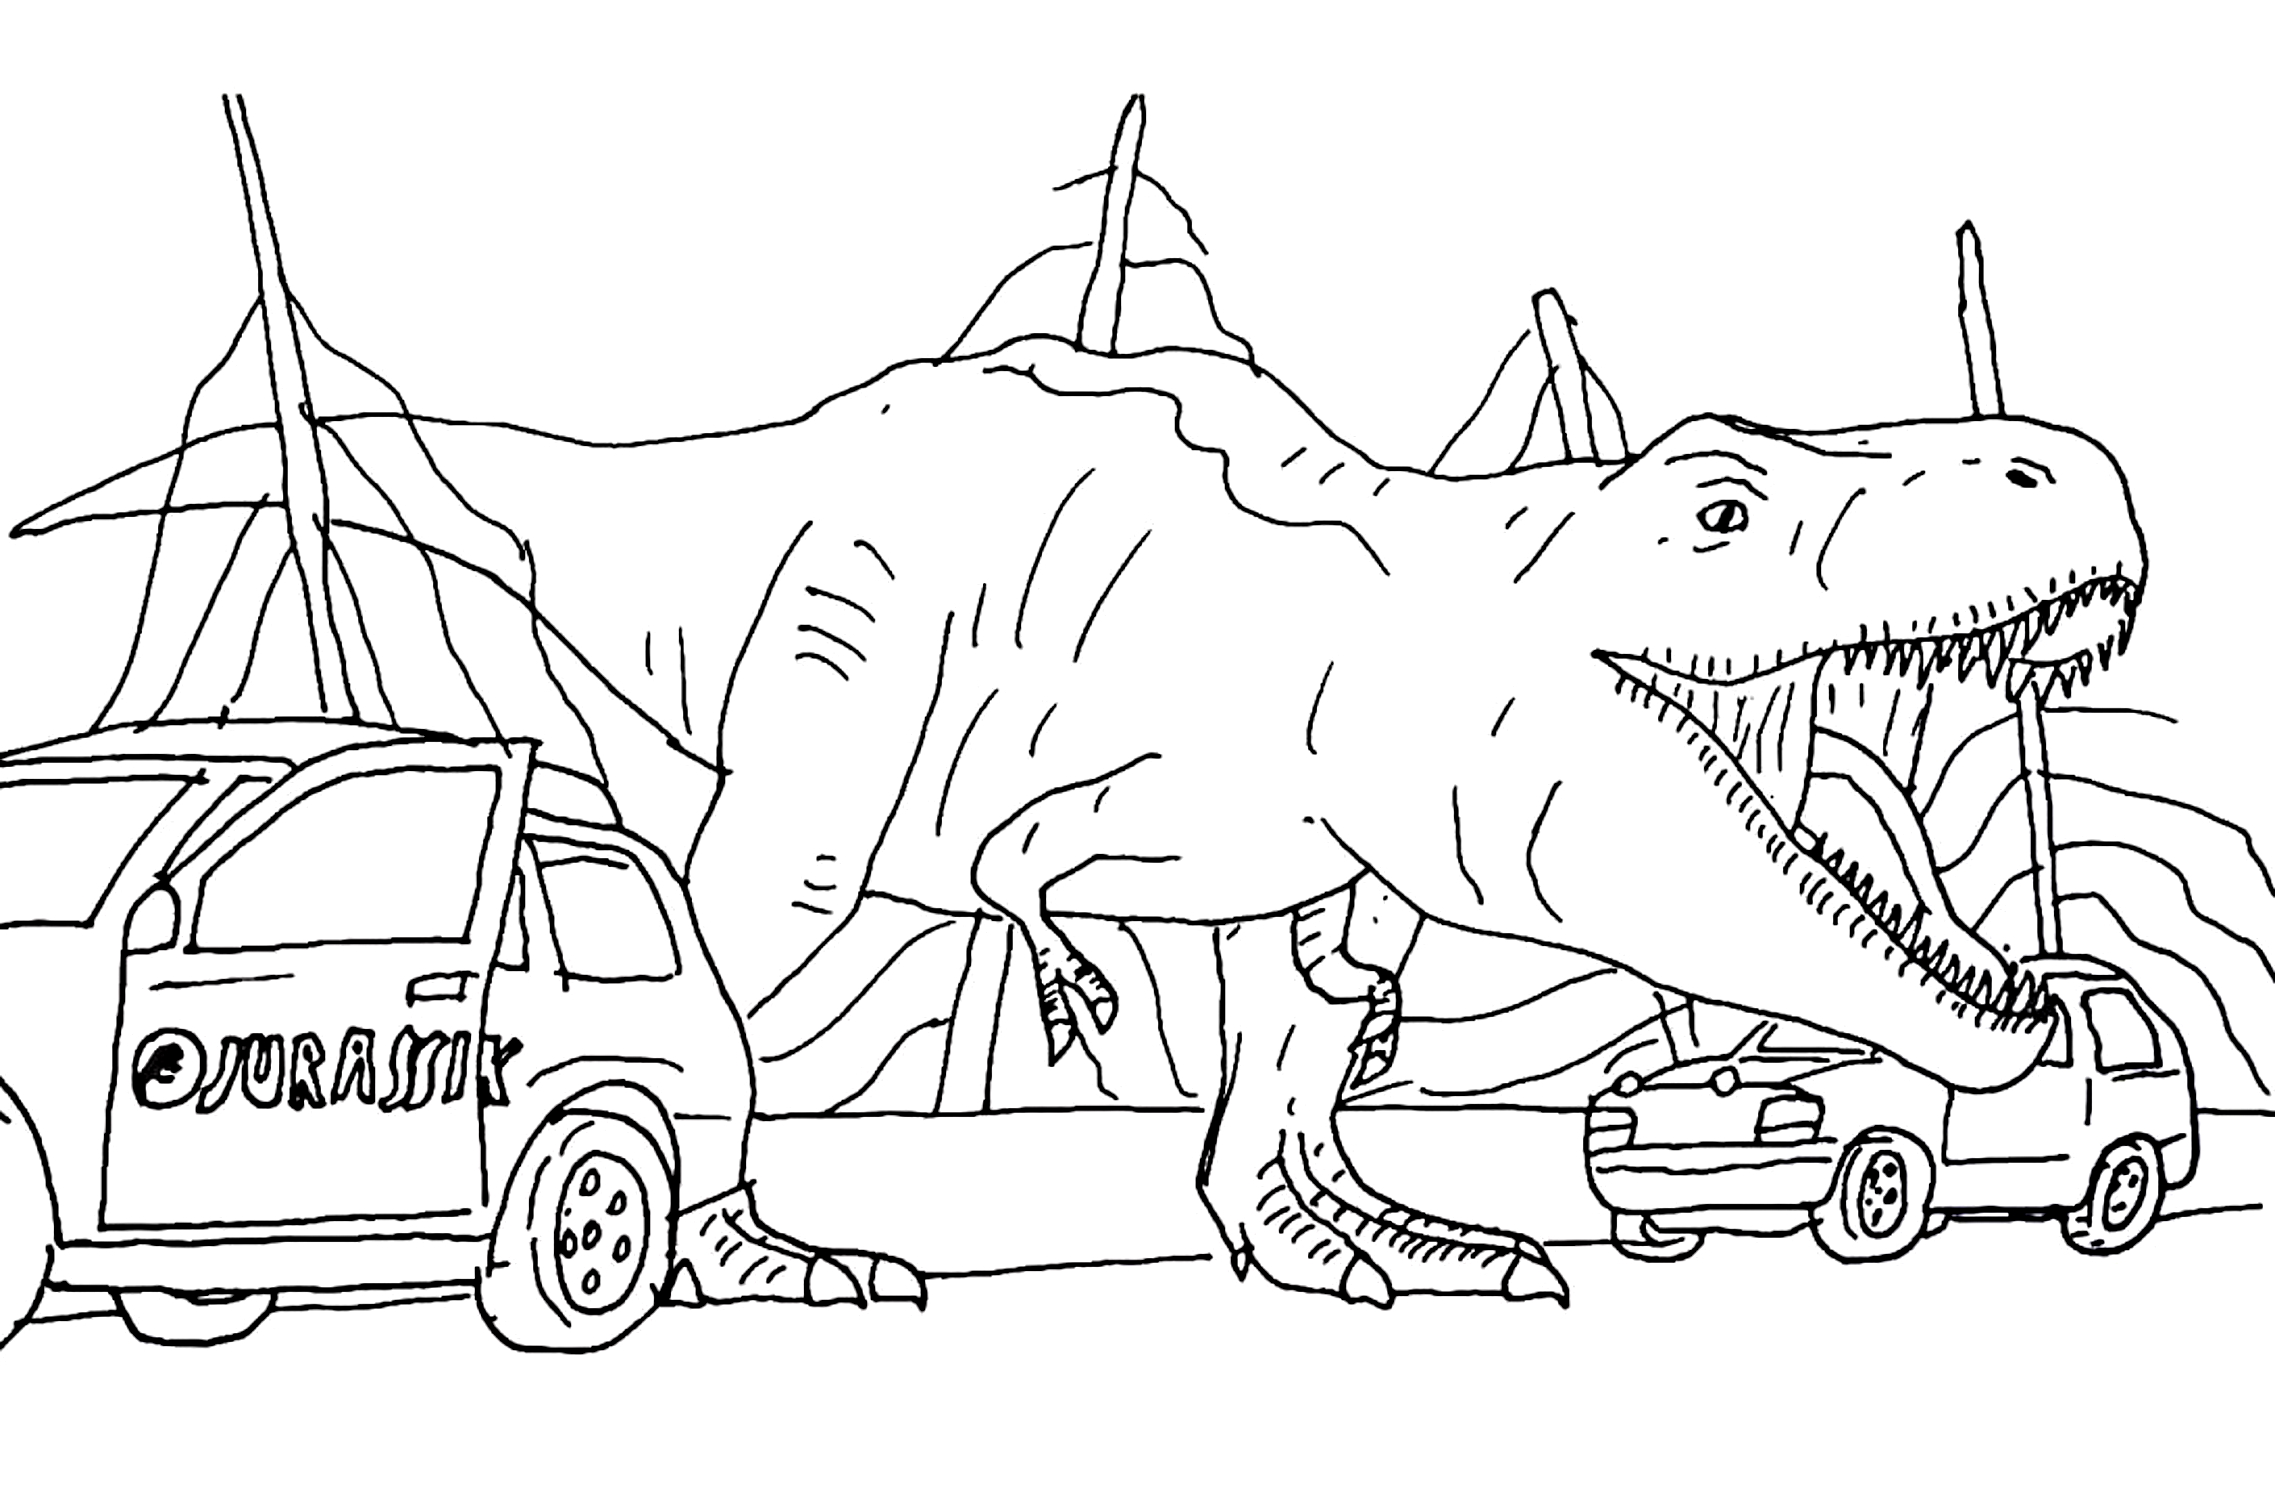 Jurassic World 11 coloring page